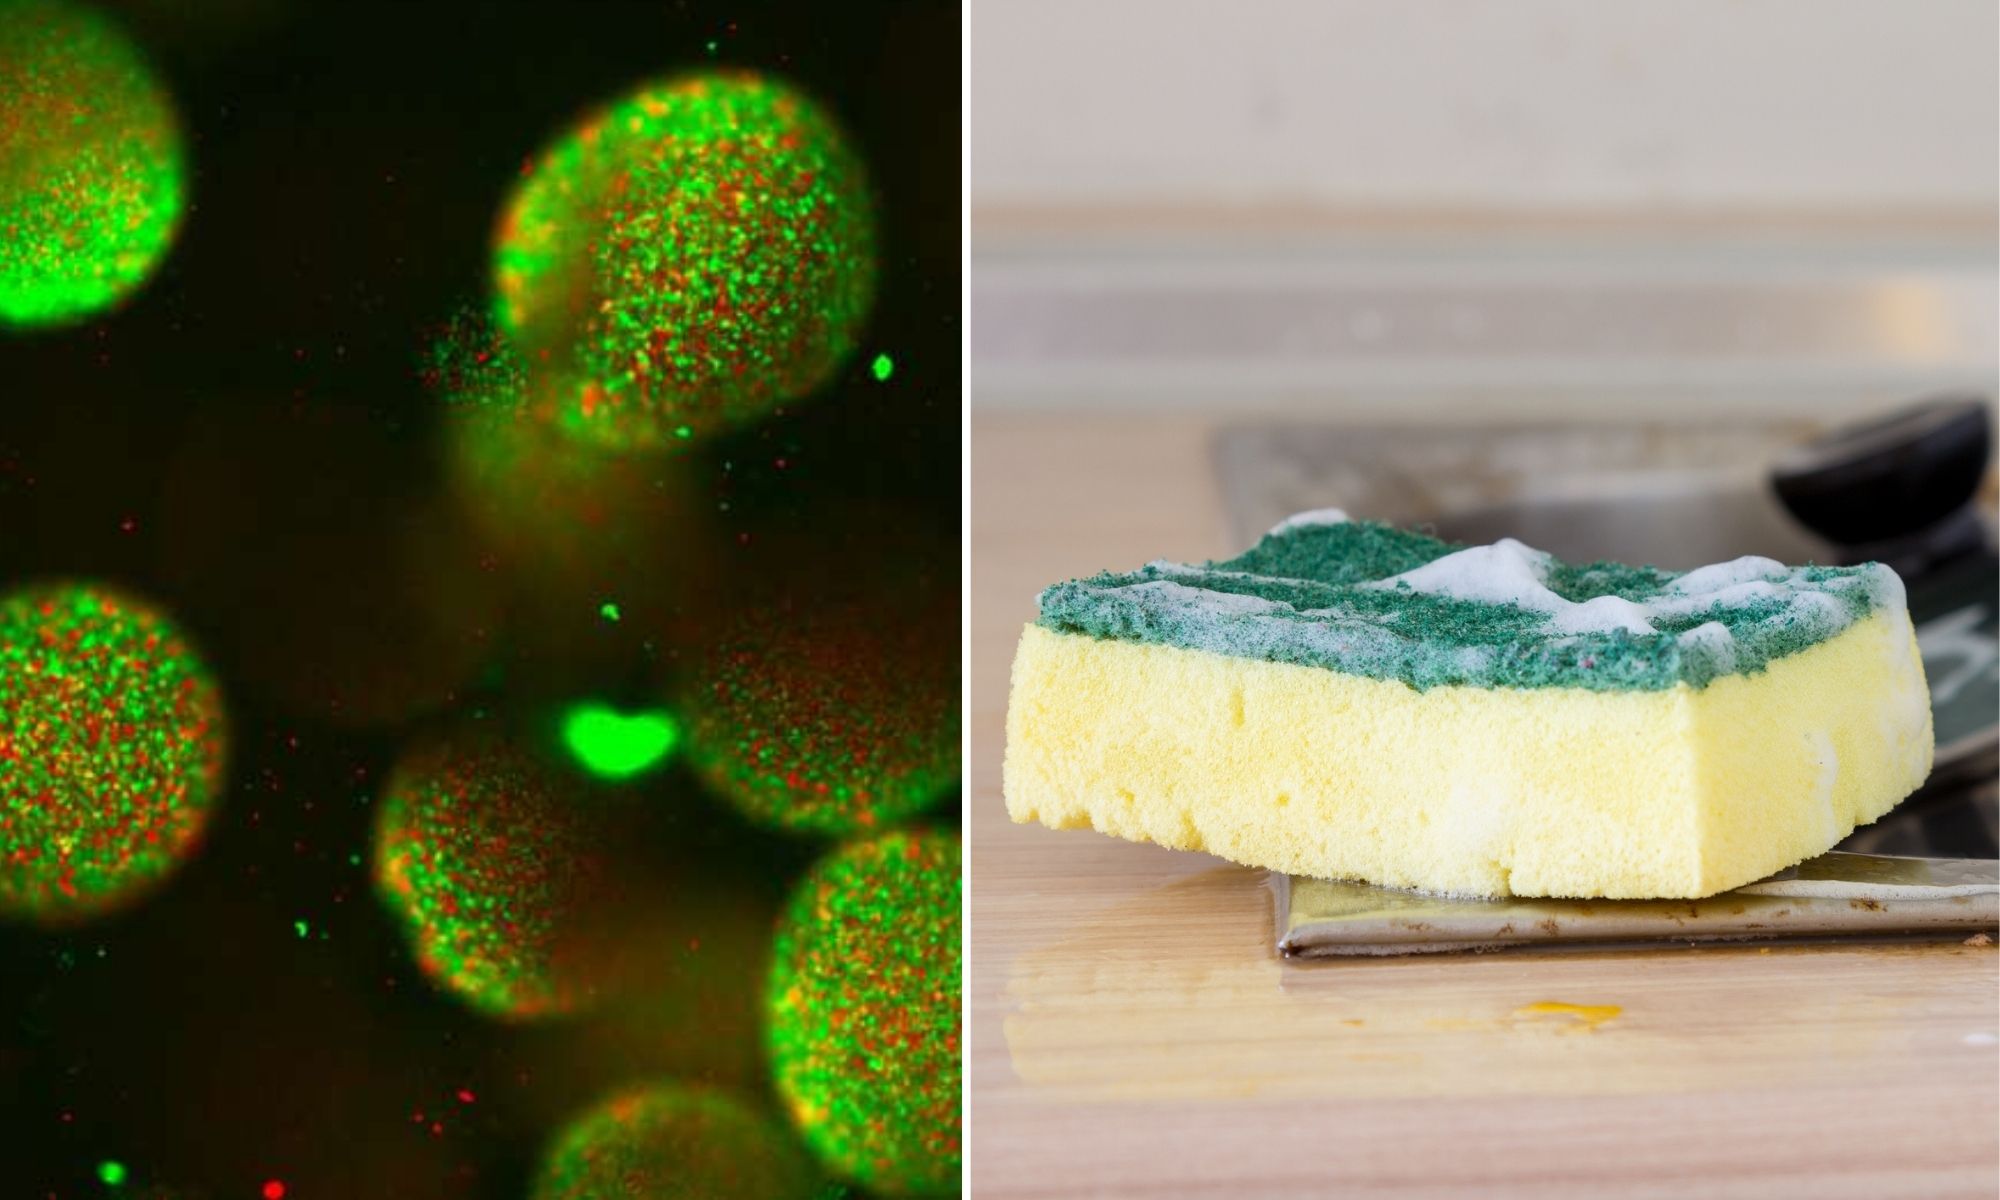 How Worried Should I Be About Bacteria on Kitchen Sponges?